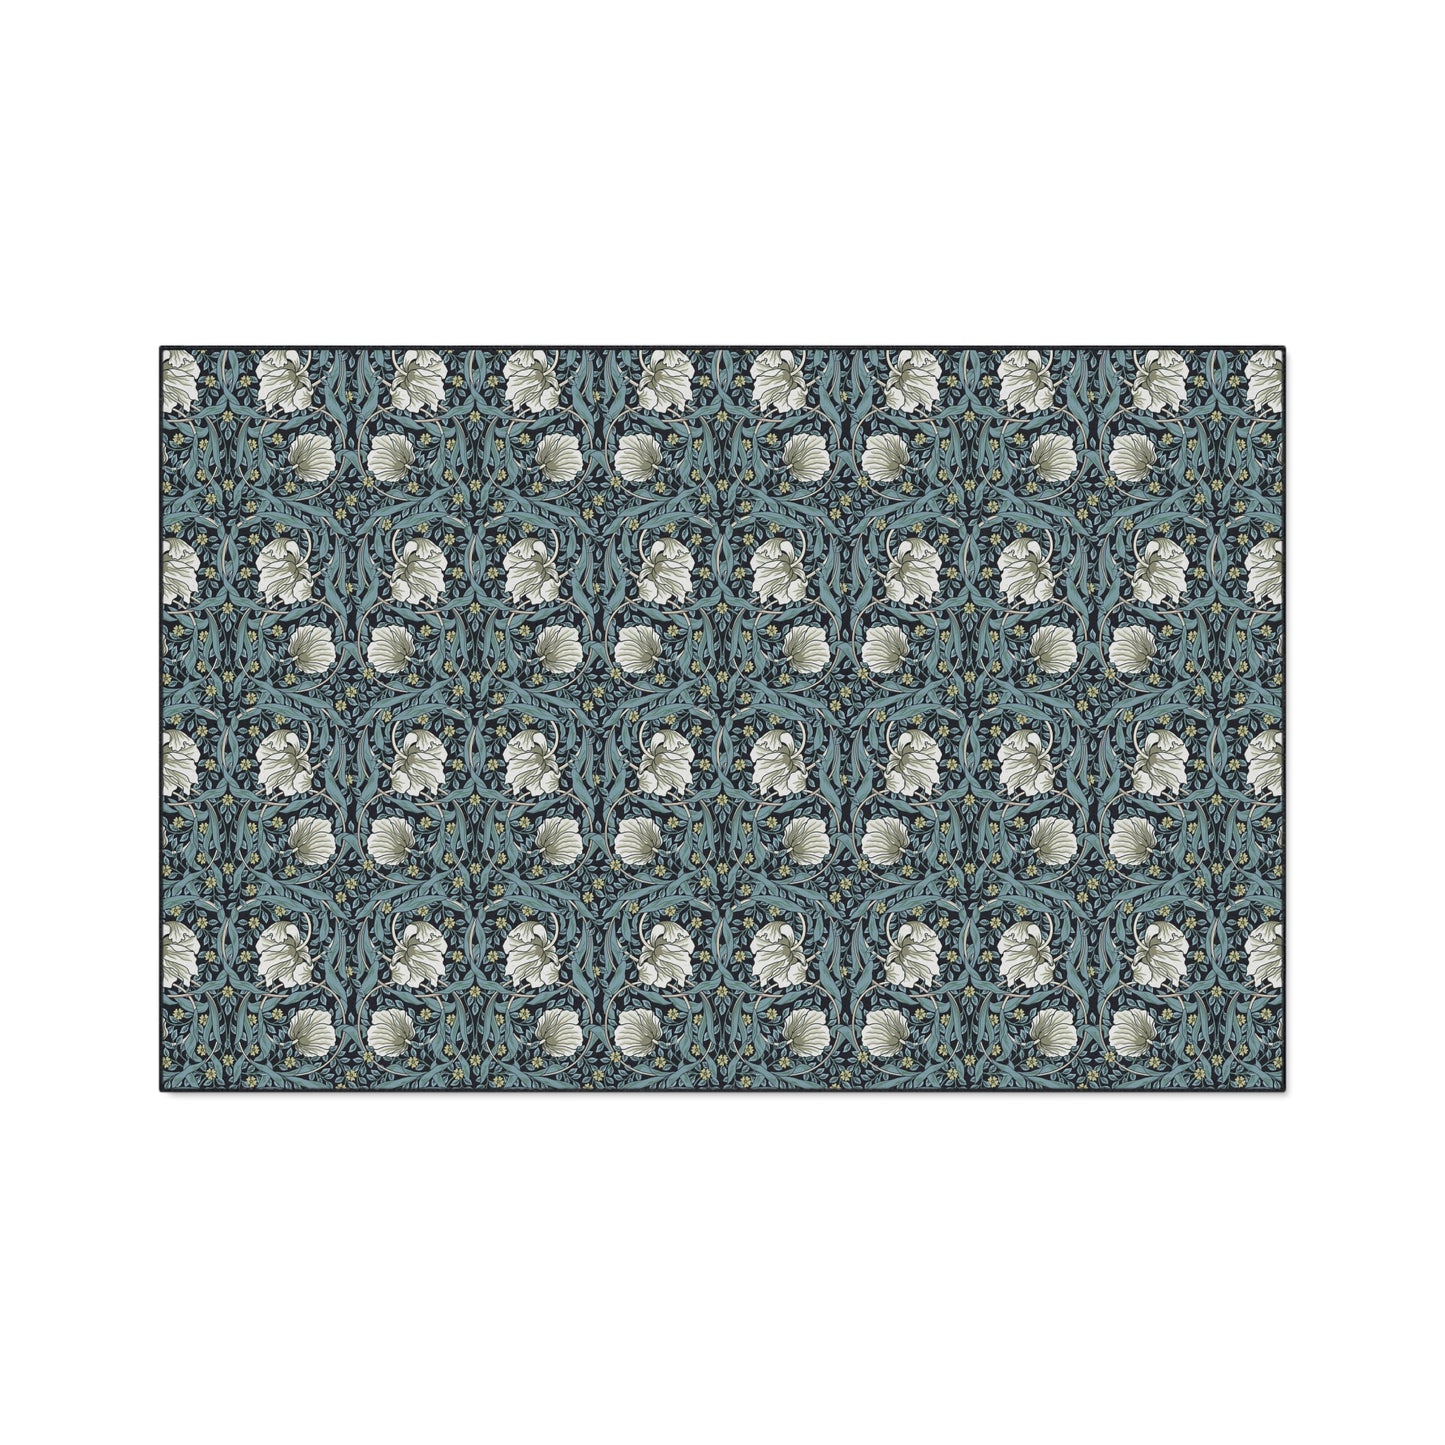 william-morris-co-heavy-duty-floor-mat-pimpernel-collection-slate-1